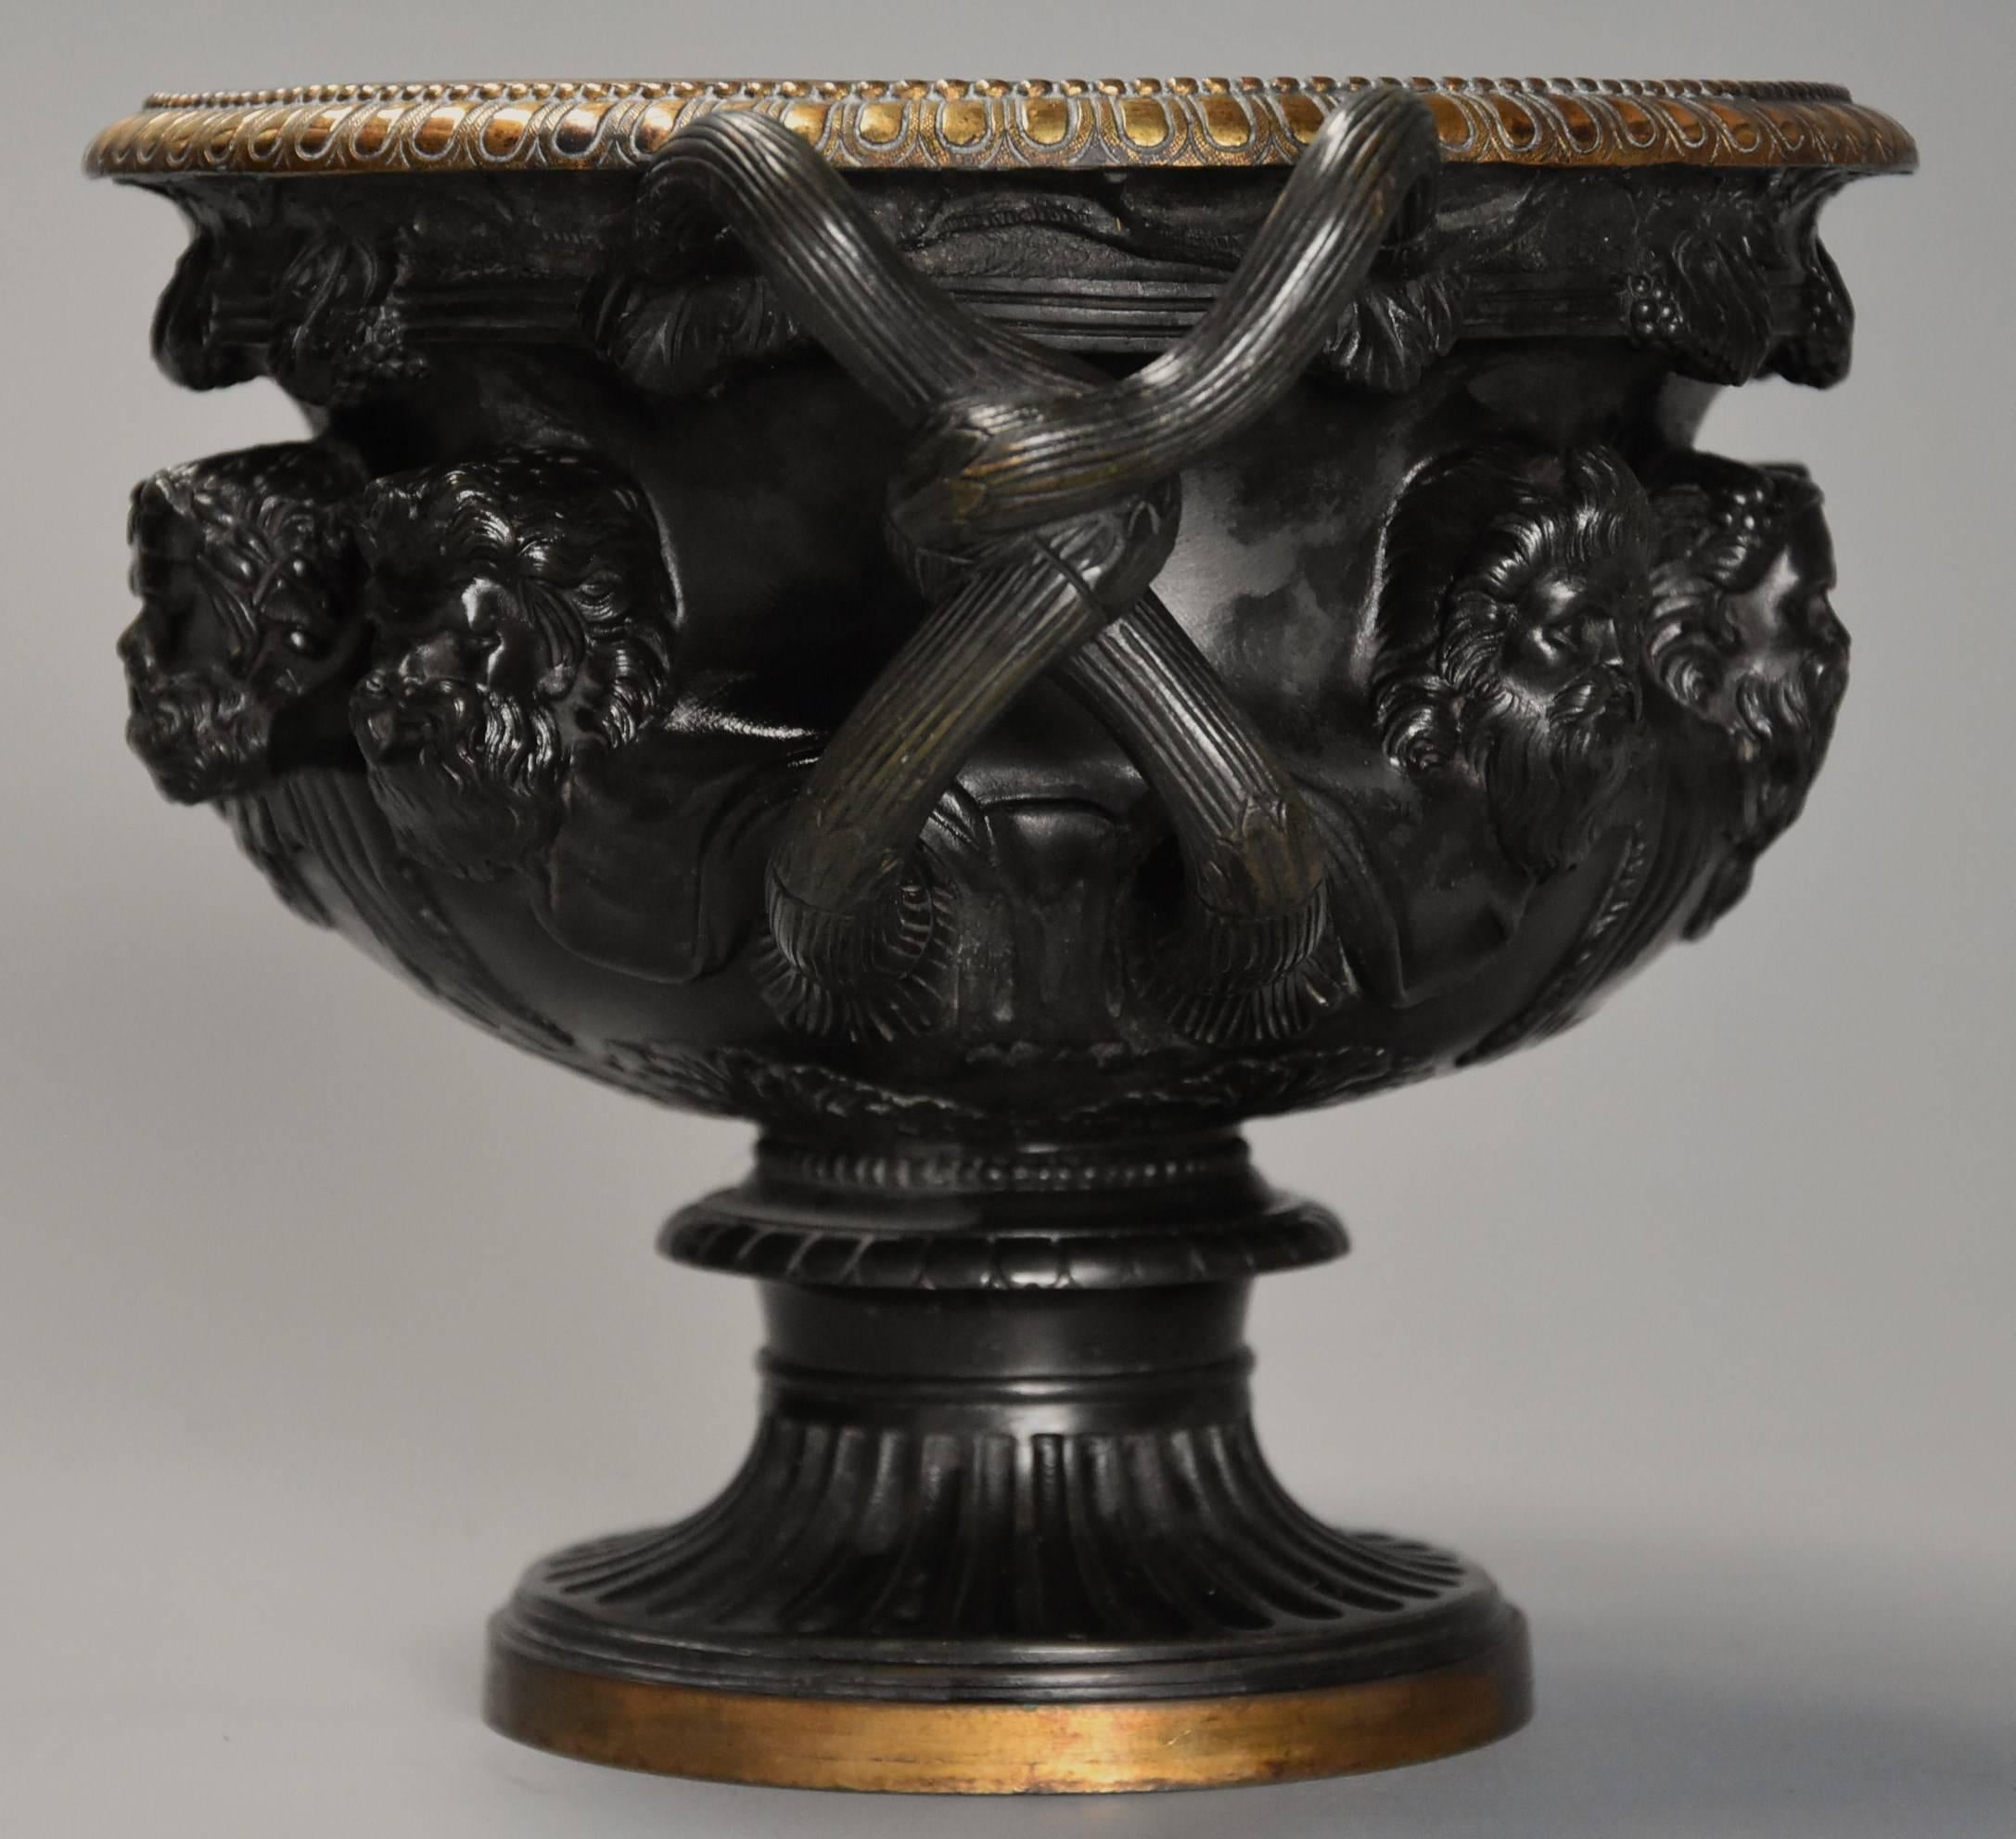 European Good Quality Grand Tour Bronze Reduction 'Warwick Vase' after the Antique